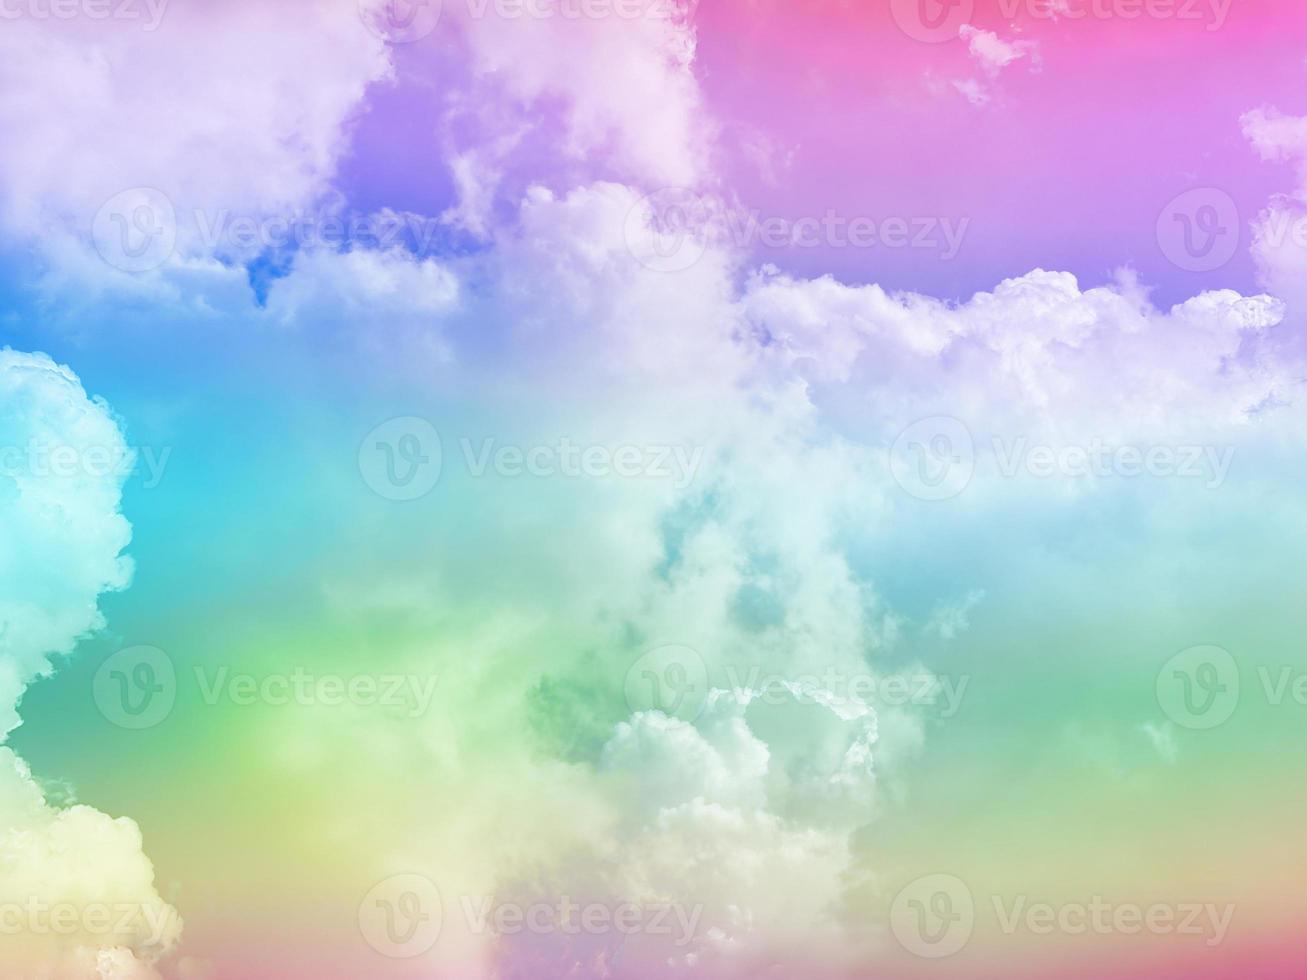 beauty sweet pastel green purple  colorful with fluffy clouds on sky. multi color rainbow image. abstract fantasy growing light photo